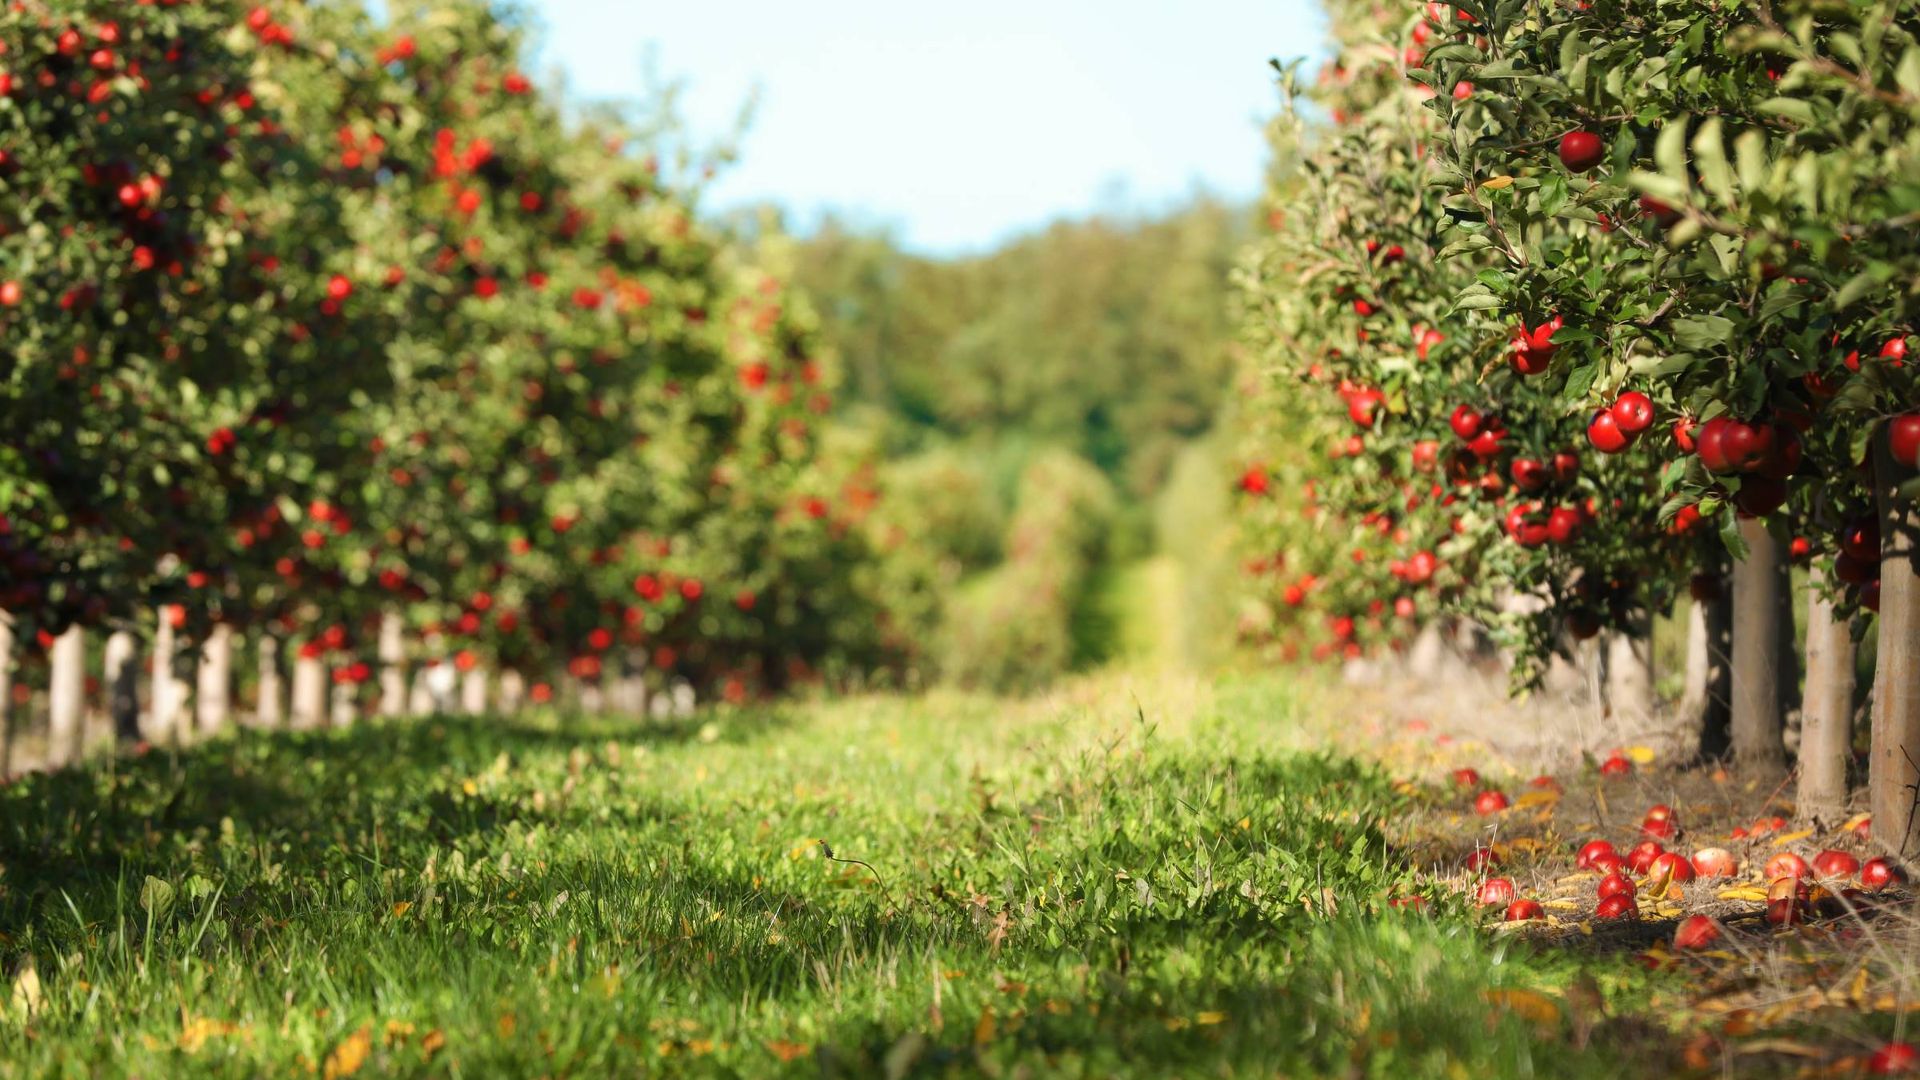 Image of an apple orchard